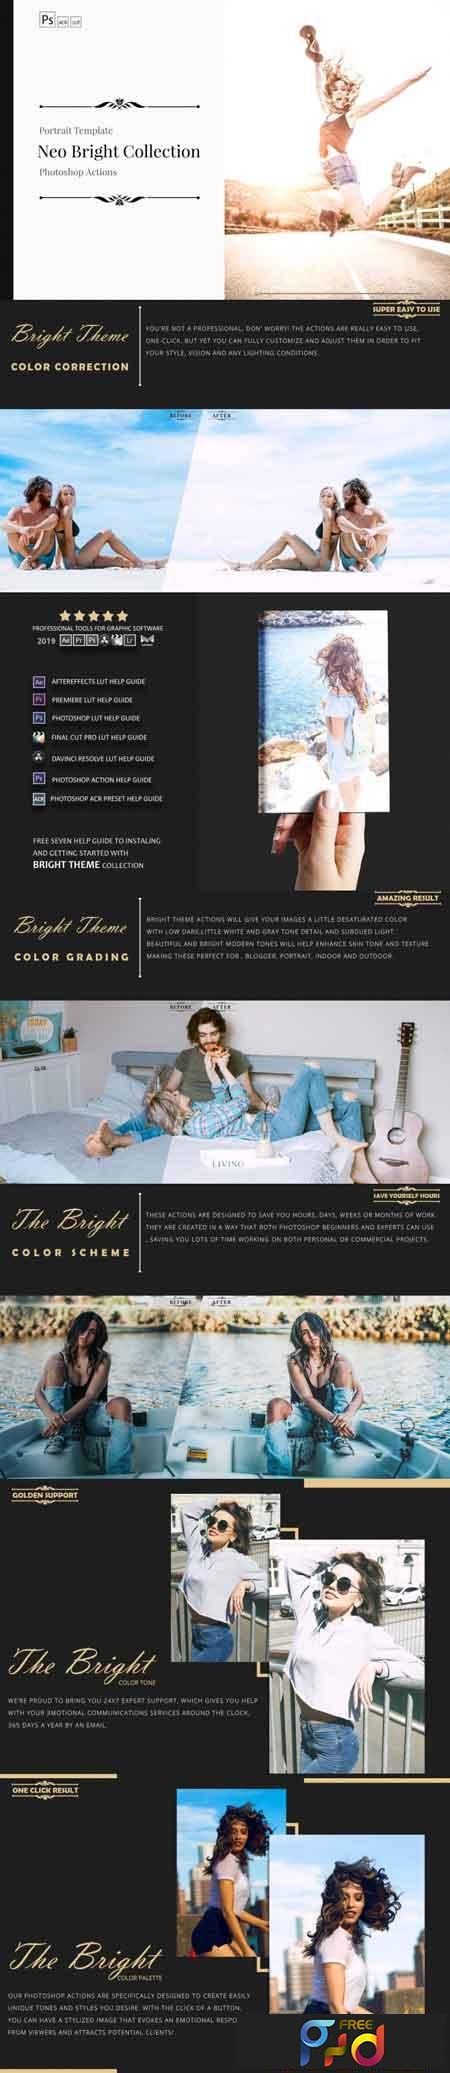 Neo Bright Color Grading photoshop actions,ACR and LUT Preset